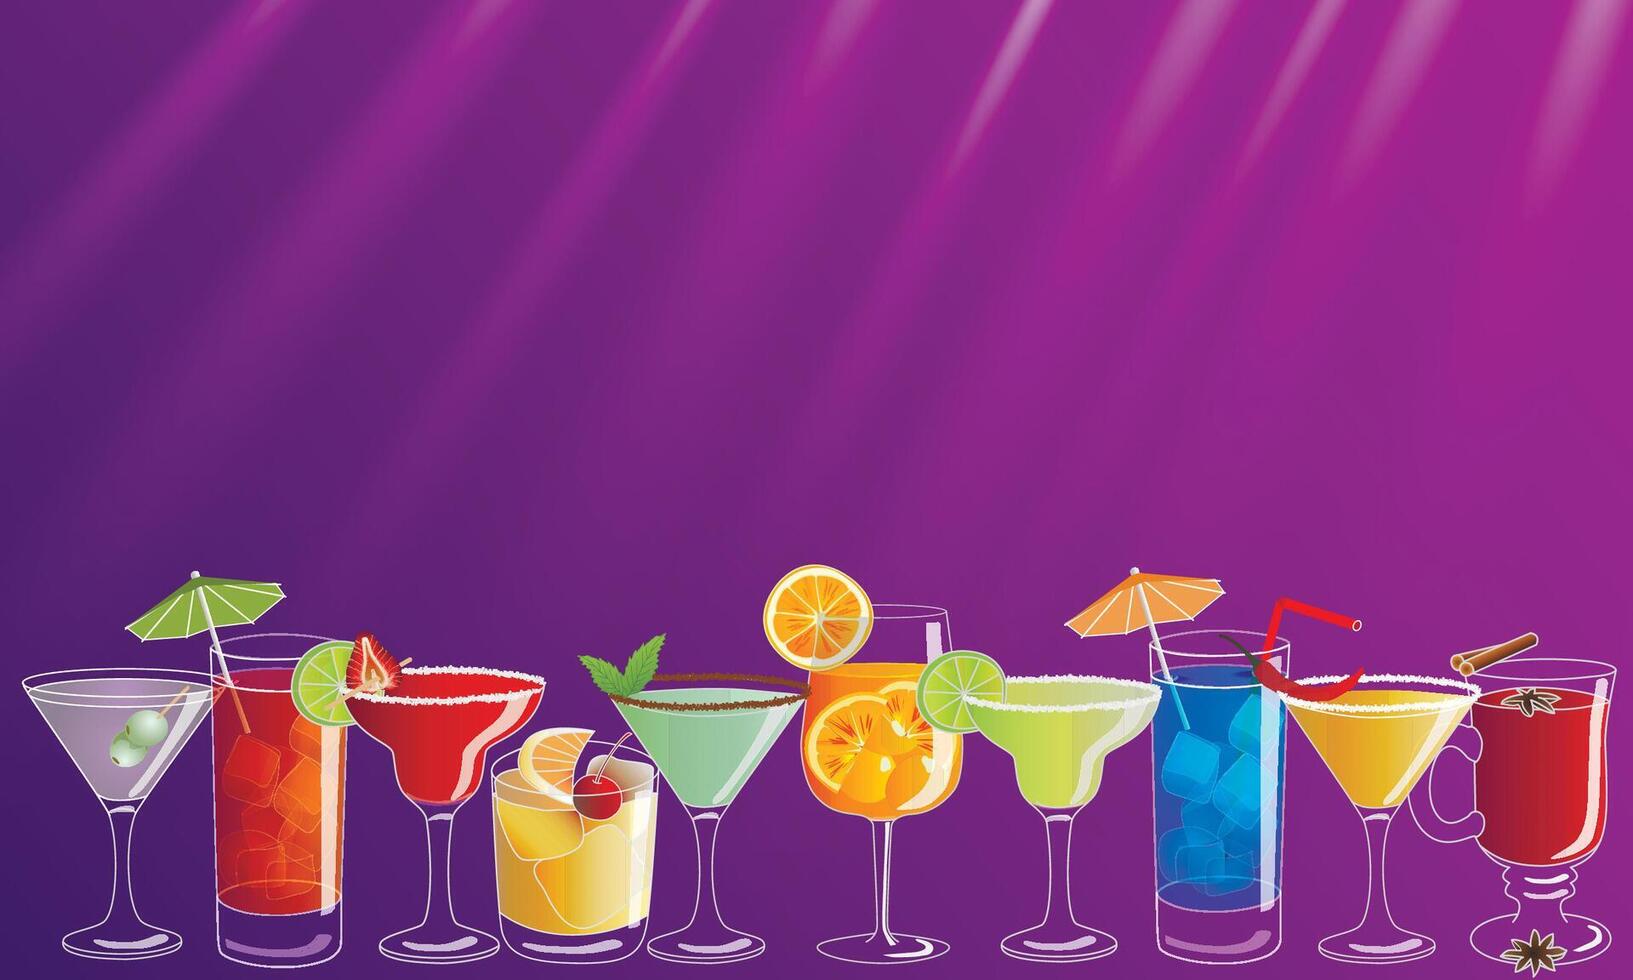 Cocktail party vector invitation poster or banner with colorful hand drawn drinks